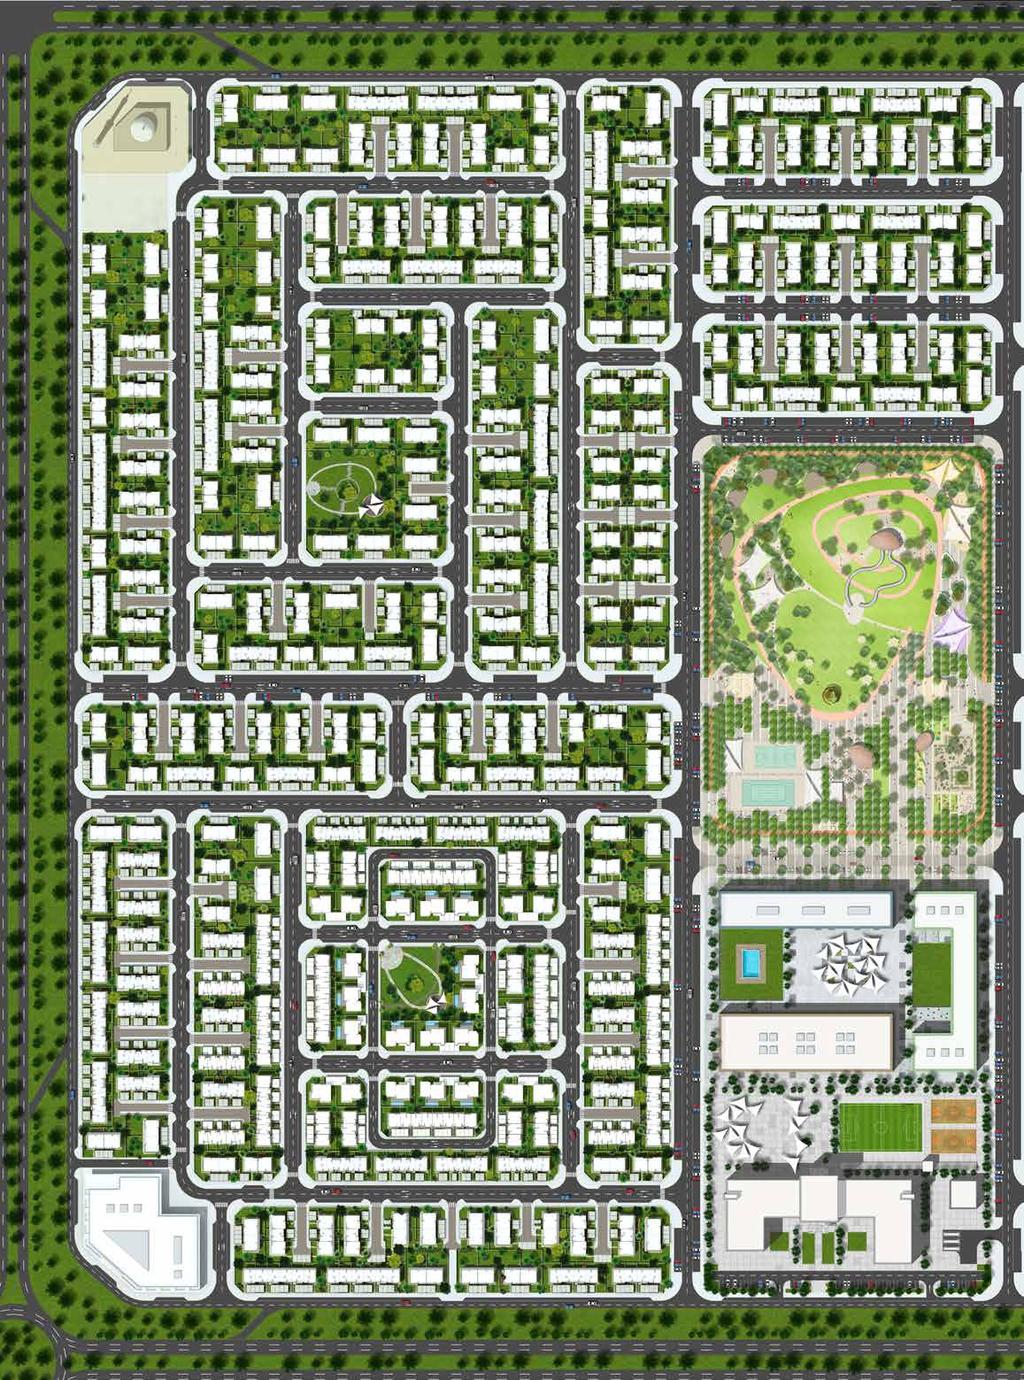 Nasma Master Plan Amenities 1 Neighborhood Park 2 Shopping Centre 3 Mosque 4 School Educational family park 5 Playgrounds 6 Running Lane 7 Bicycle Lane 8 Barbeque